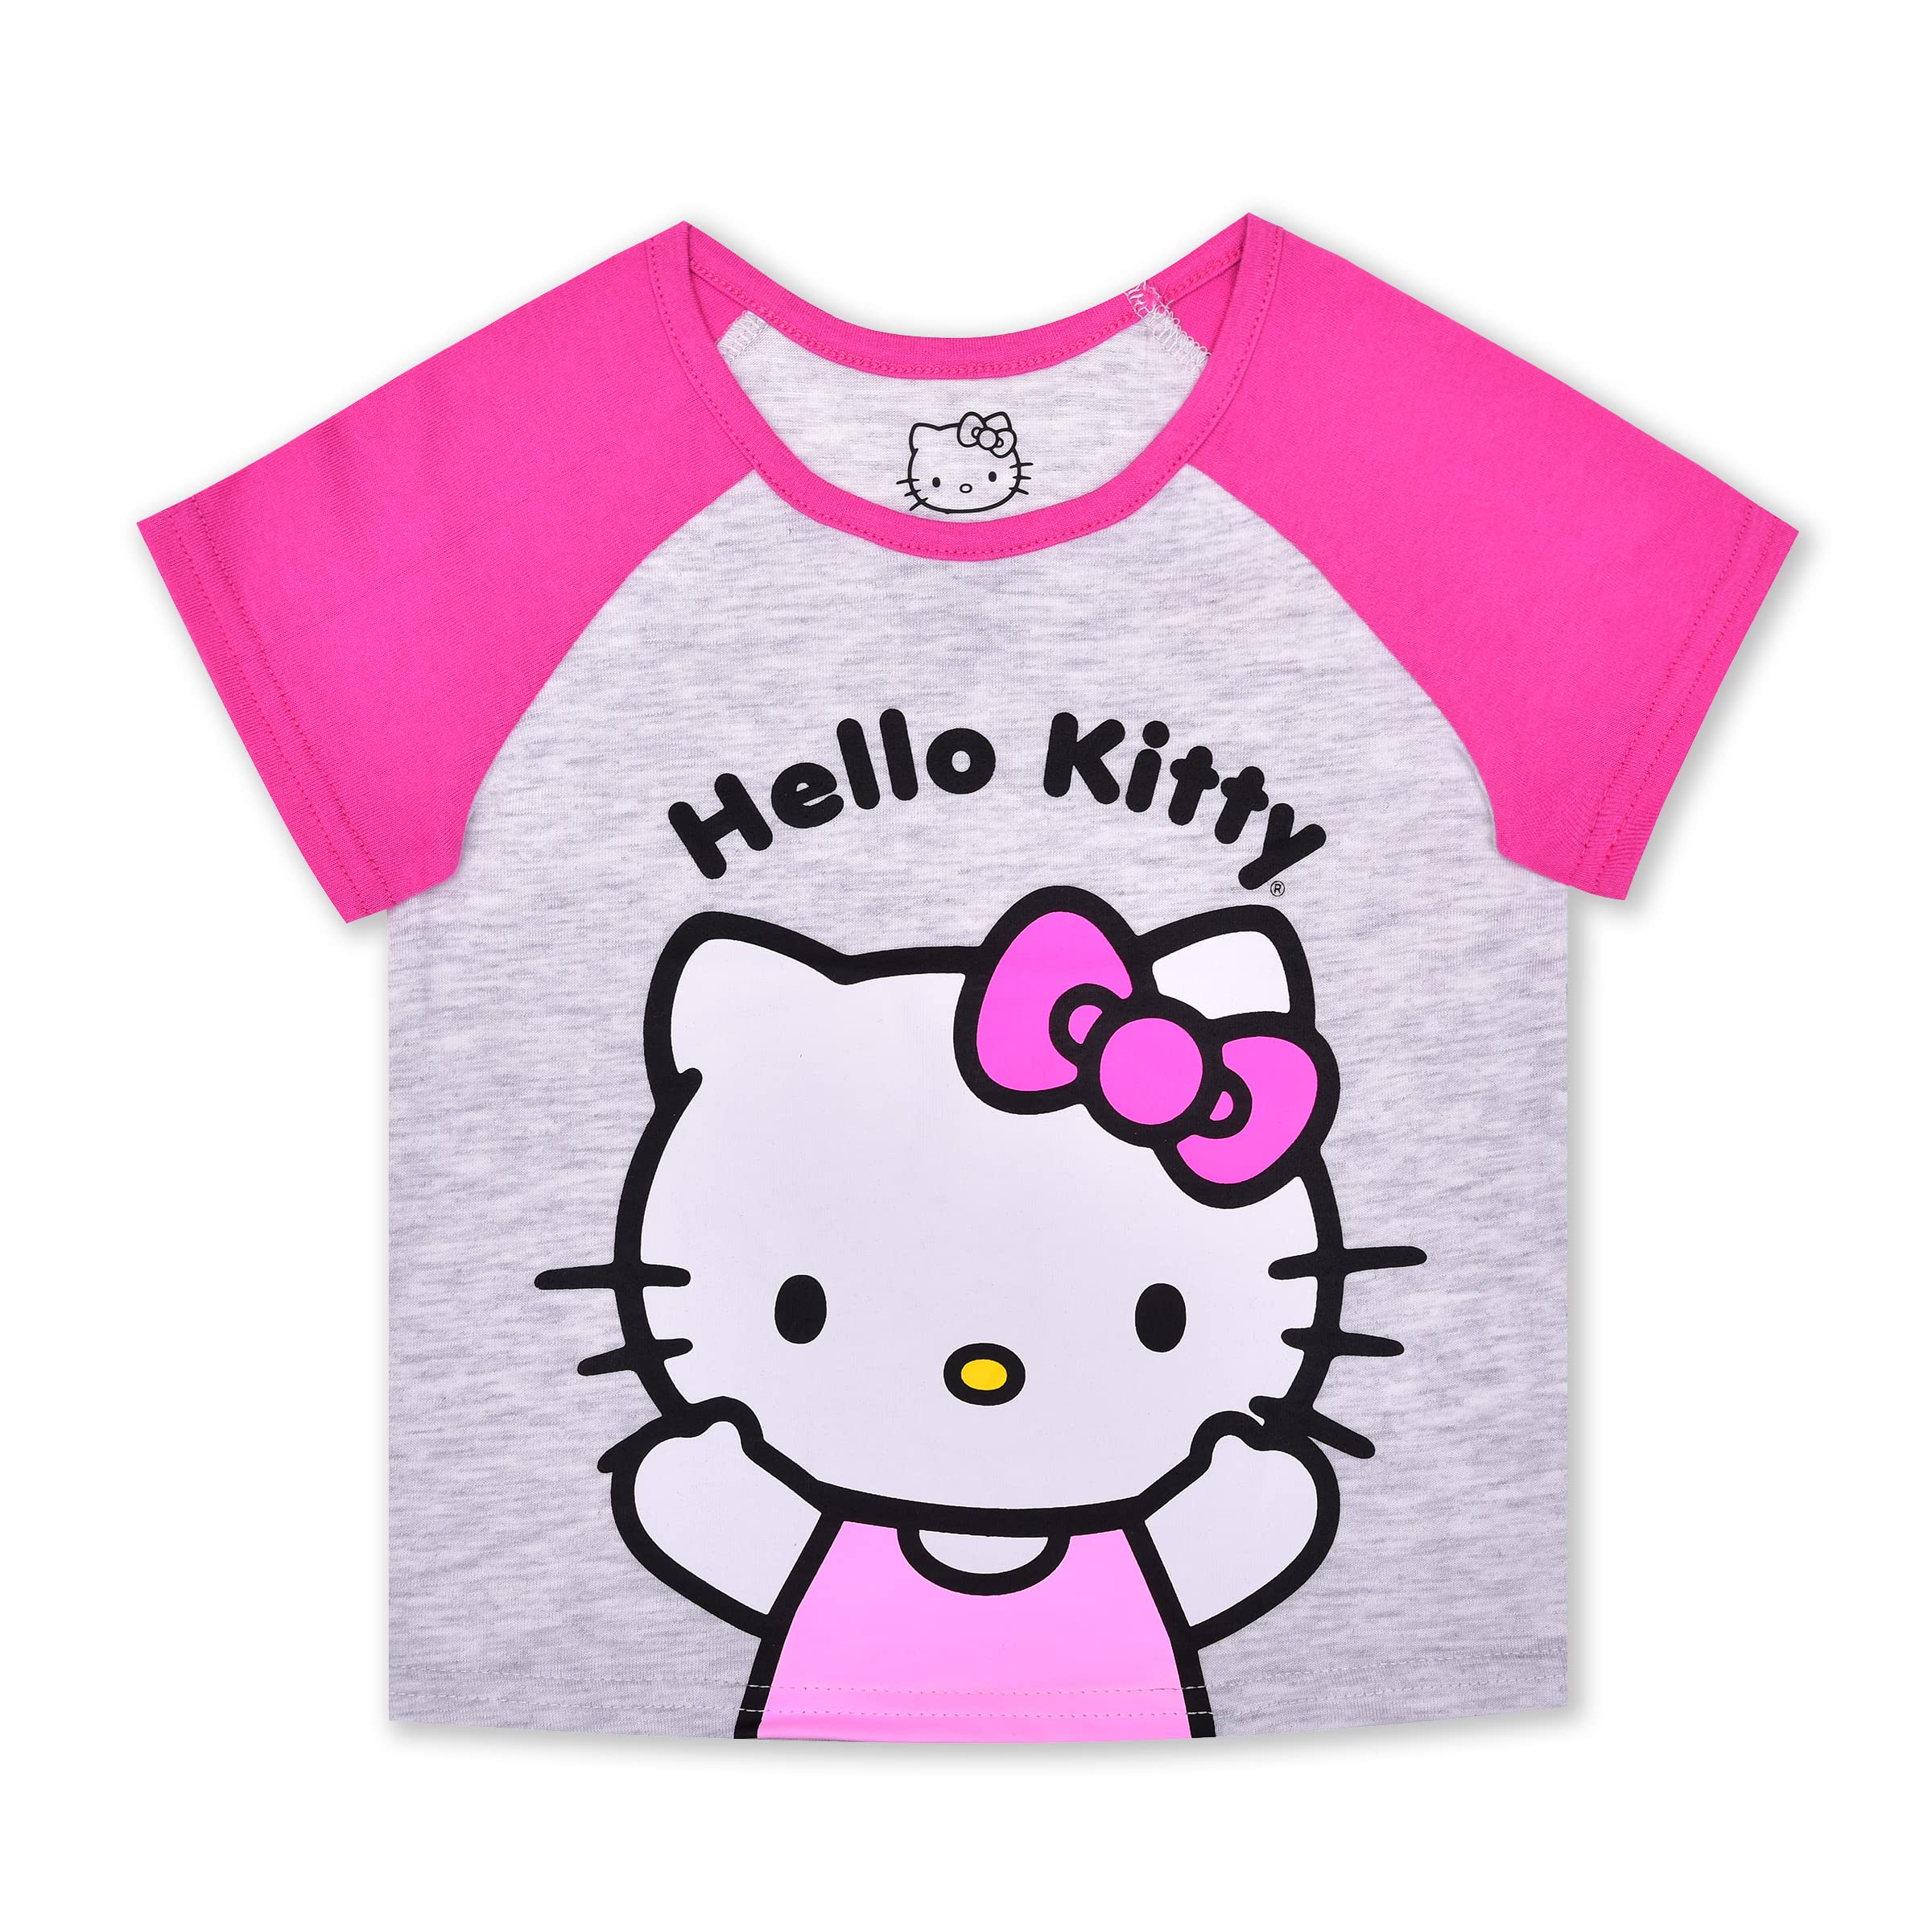 Hello Kitty Girls T-Shirt and Short Set for Infant, Toddler, Little and Big Girls - Pink